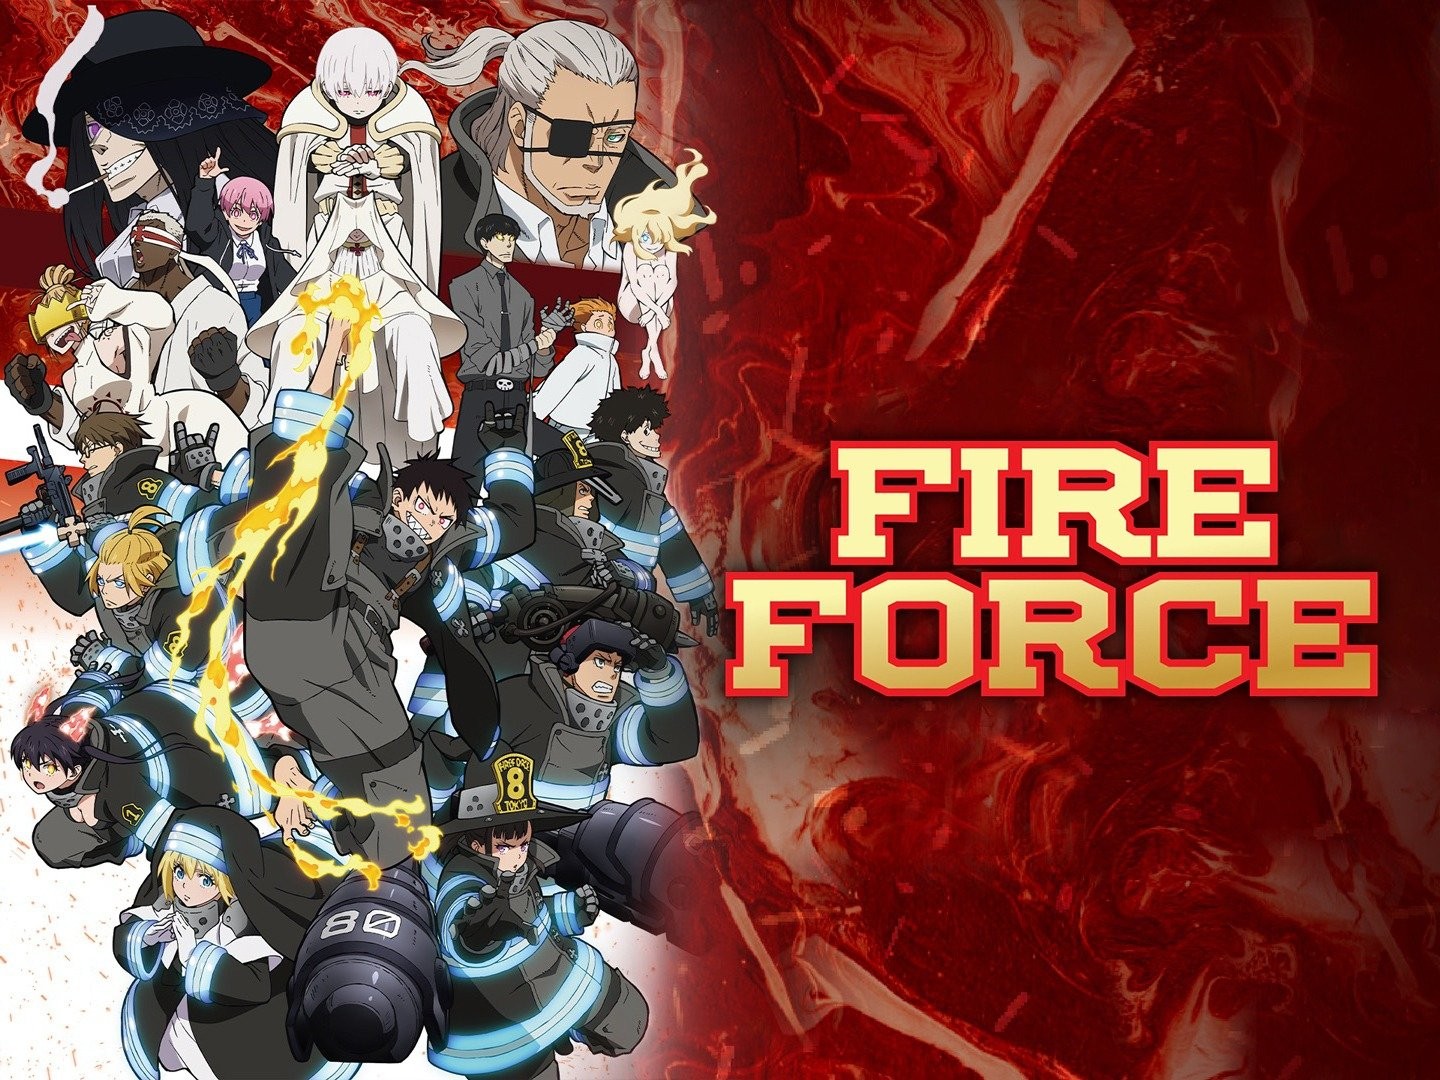 Fire Force S2 Episode 11 Preview! : r/firebrigade